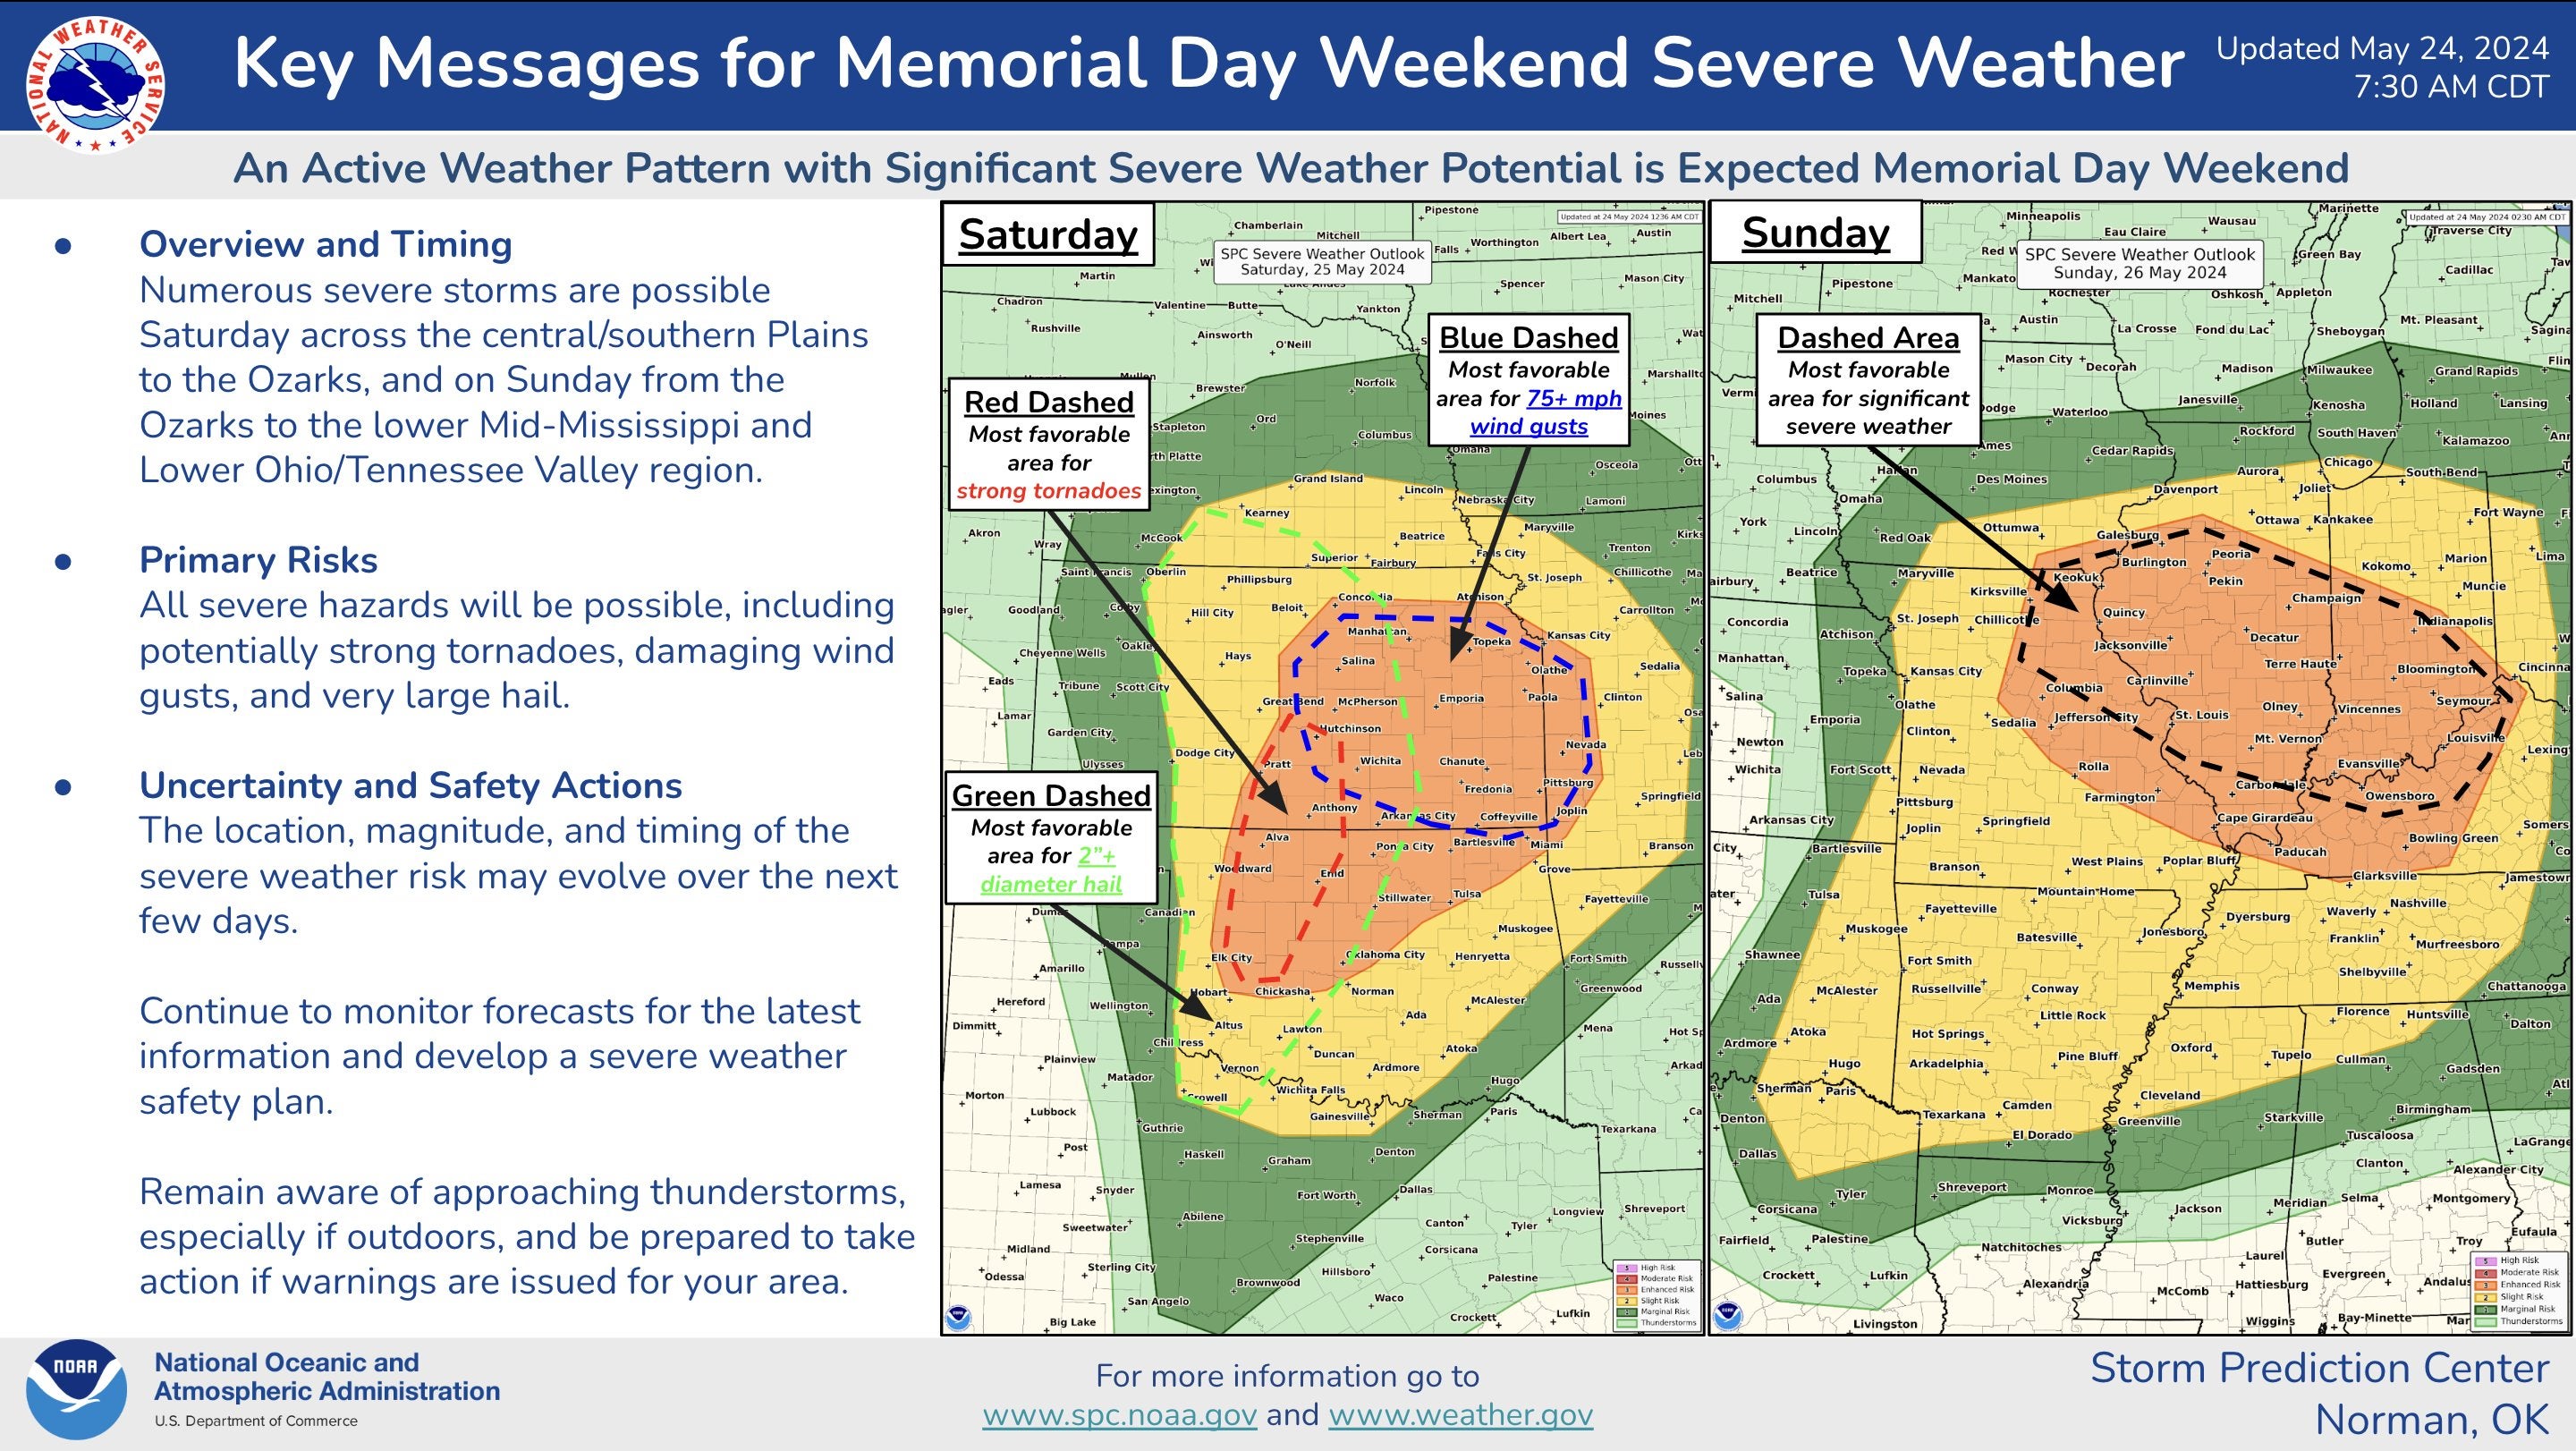 An infographic from the National Weather Service illustrating severe weather in the midwest over Memorial Day Weekend